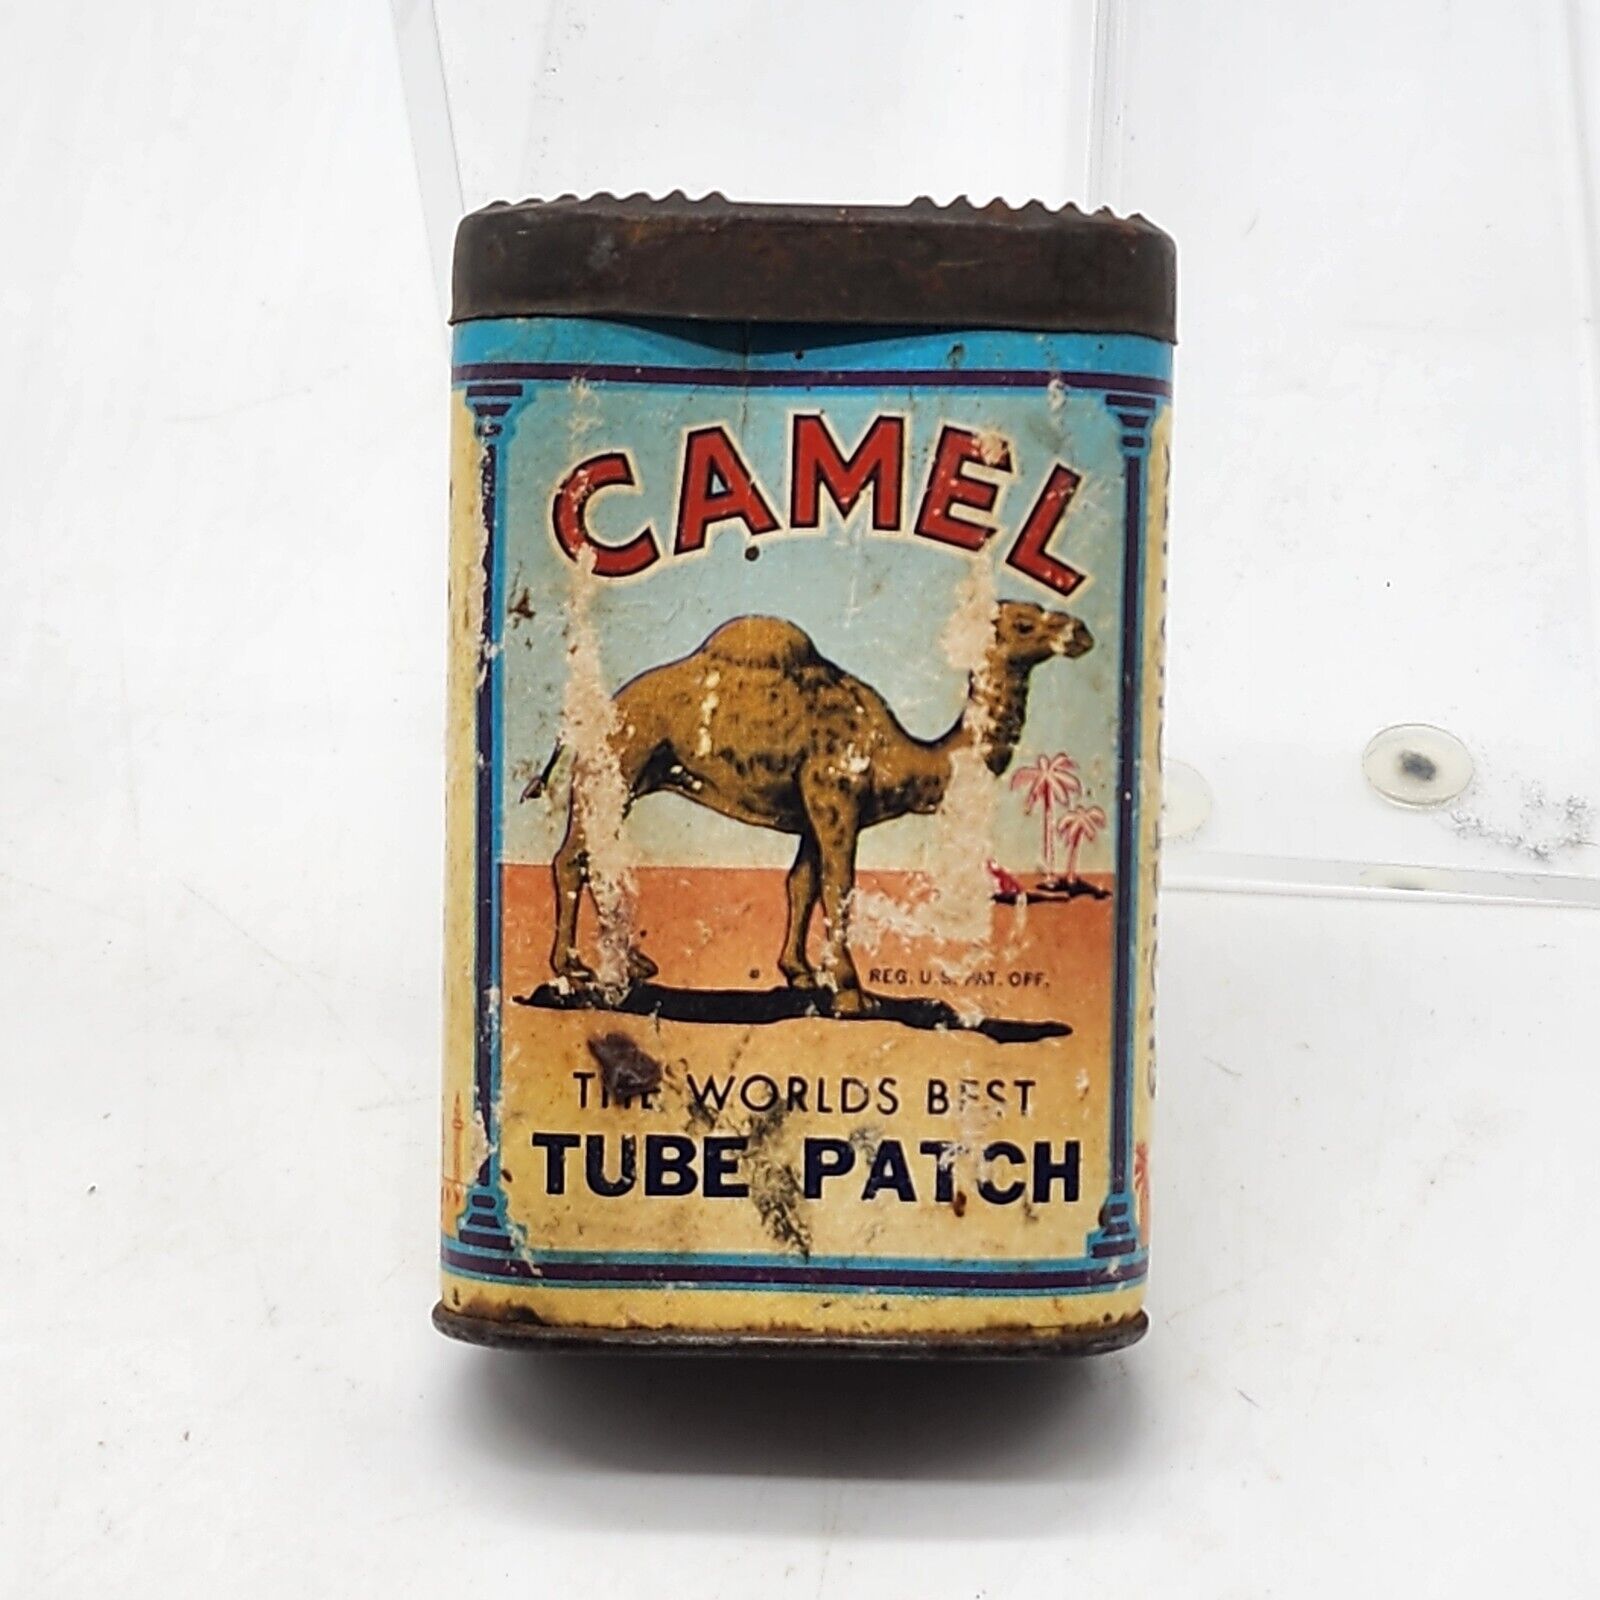 Vintage 1949 Camel Tube Patch Container Graphic Advertising  